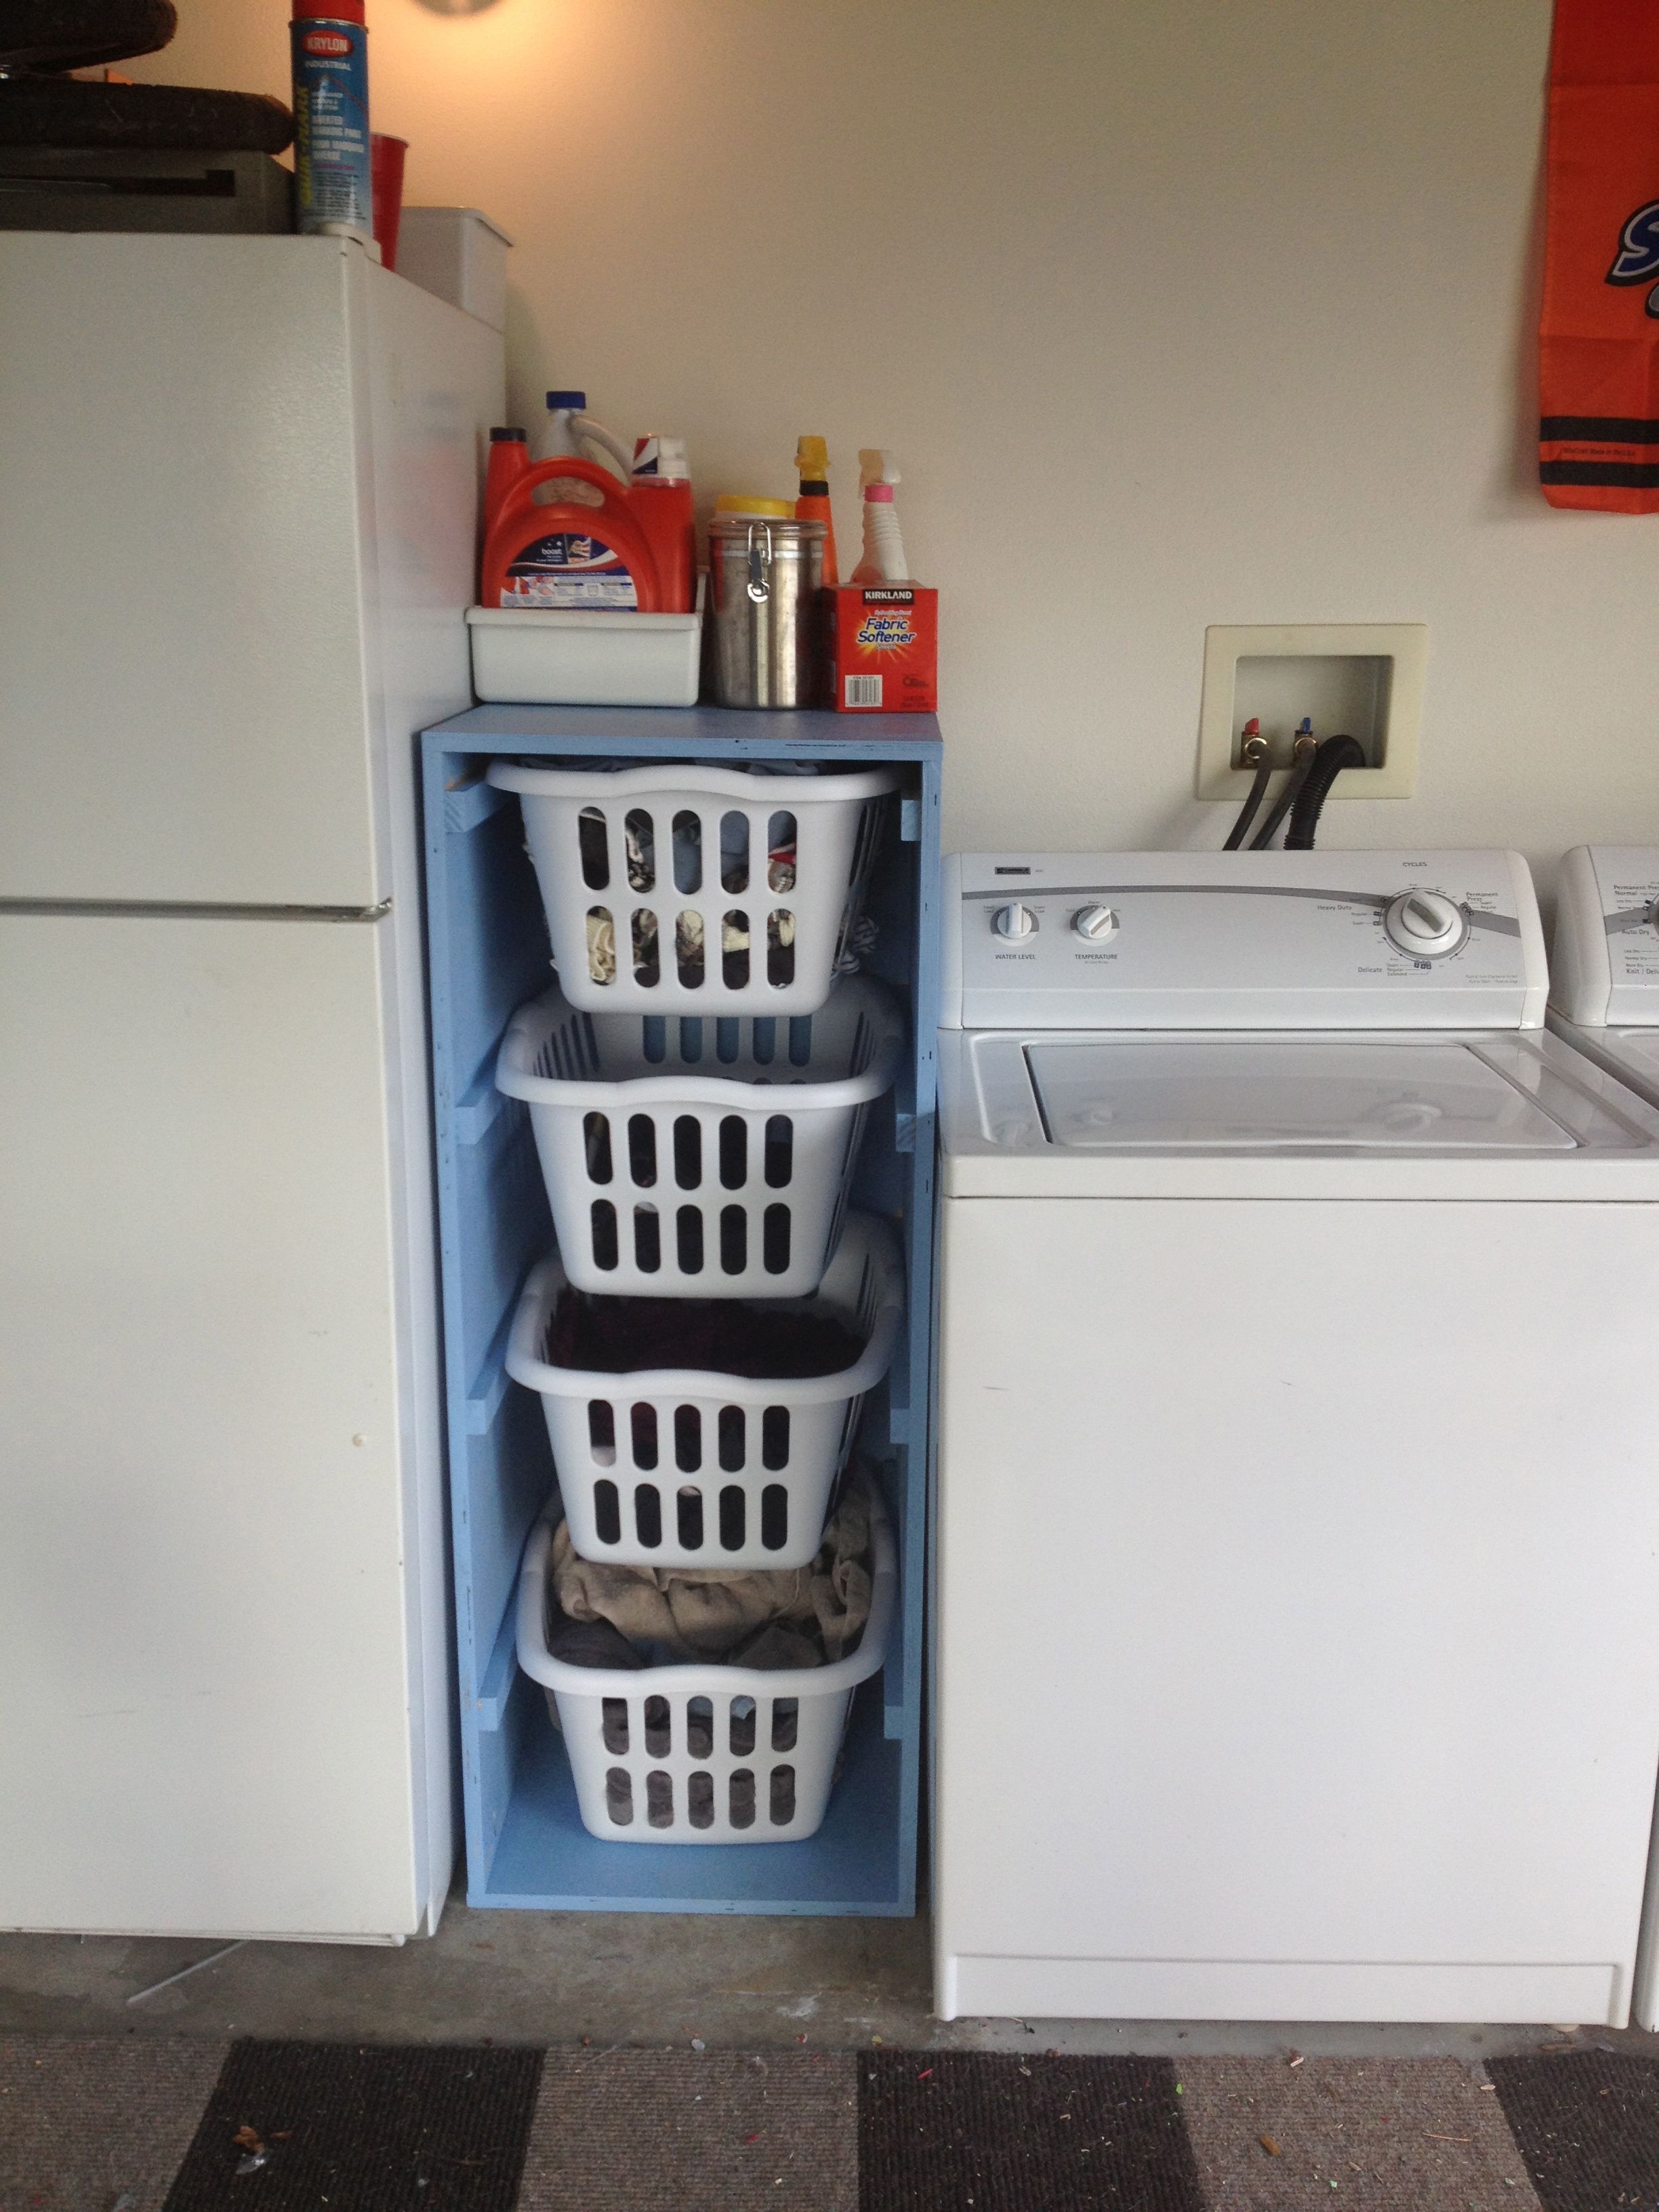 Laundry Sorter | Do It Yourself Home Projects from Ana White…..don’t need the laundry thing but just like the idea overall.